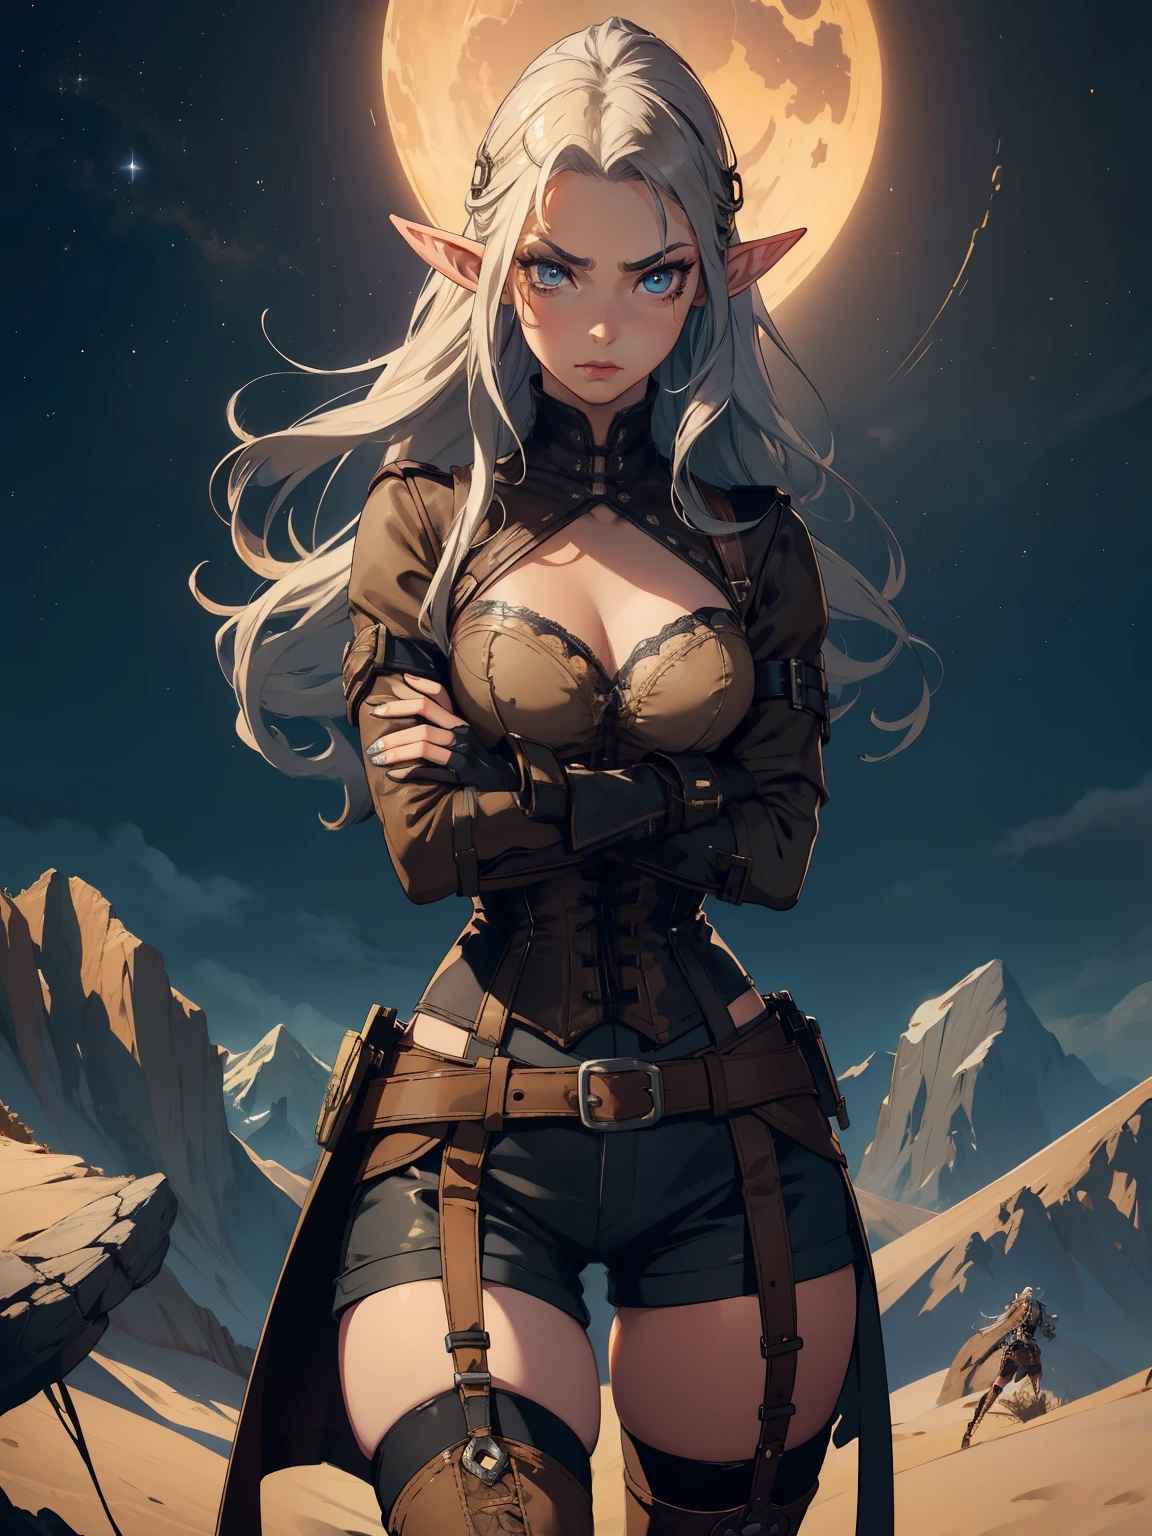 masterpiece, high quality, 1_woman, ((upper body)), (with arms crossed), ((crossing arms)), standing, (exotic skin_complexion:1.4), mature, (looking away from the viewer), (pouting face), tall, beautiful, exotic, with long elf ears, long hair, silver hair, detailed face, having diamond shaped eyes, blue eyes, (dark_eyeliner), long_eyelashes medium_bust, wearing Steampunk corset, chest window, (brown shorts), crossing belts, (goggles on head), long fingerless_gloves, belts with metal gears, black thigh highs with embroidery, knee boots with laces, dynamic lighting casts detailed shadows, mountains in distance, walking path, grassy field, night sky, stars, 